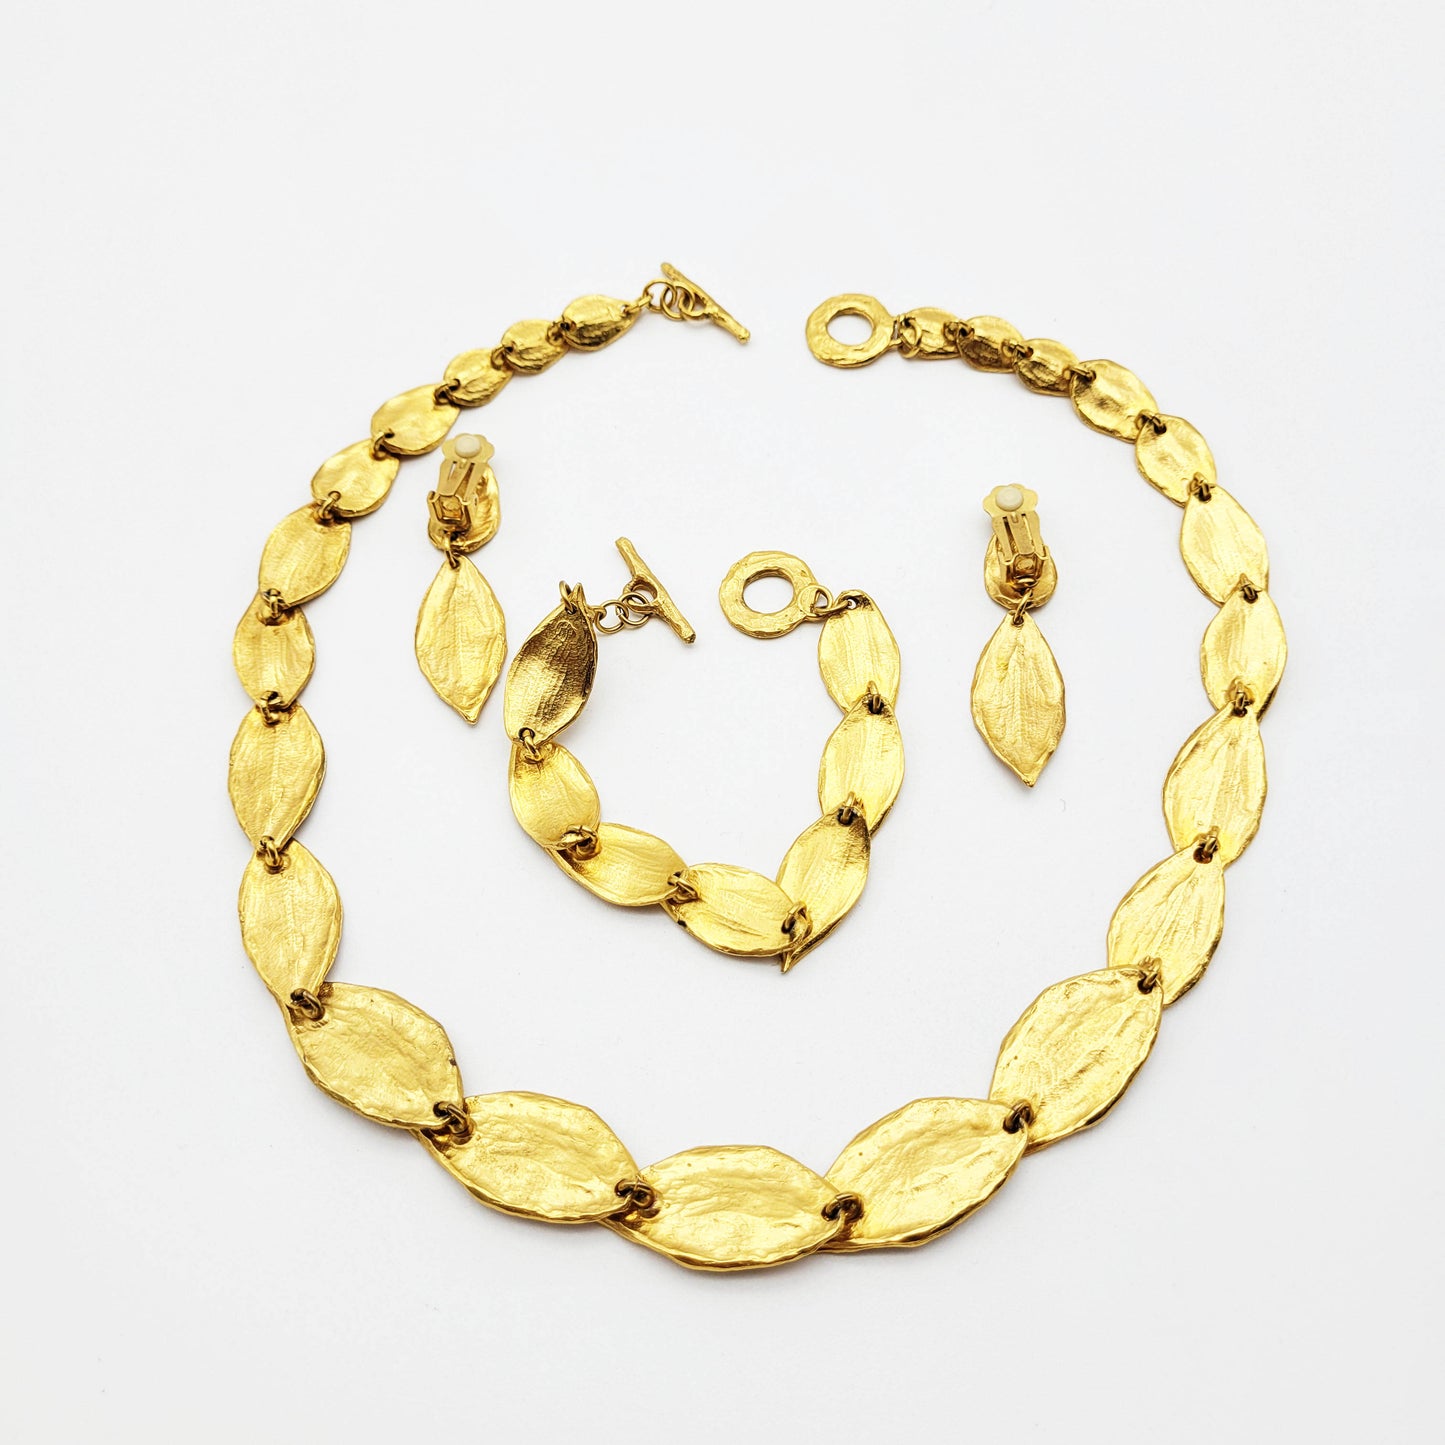 Vintage gold plated jewelry set